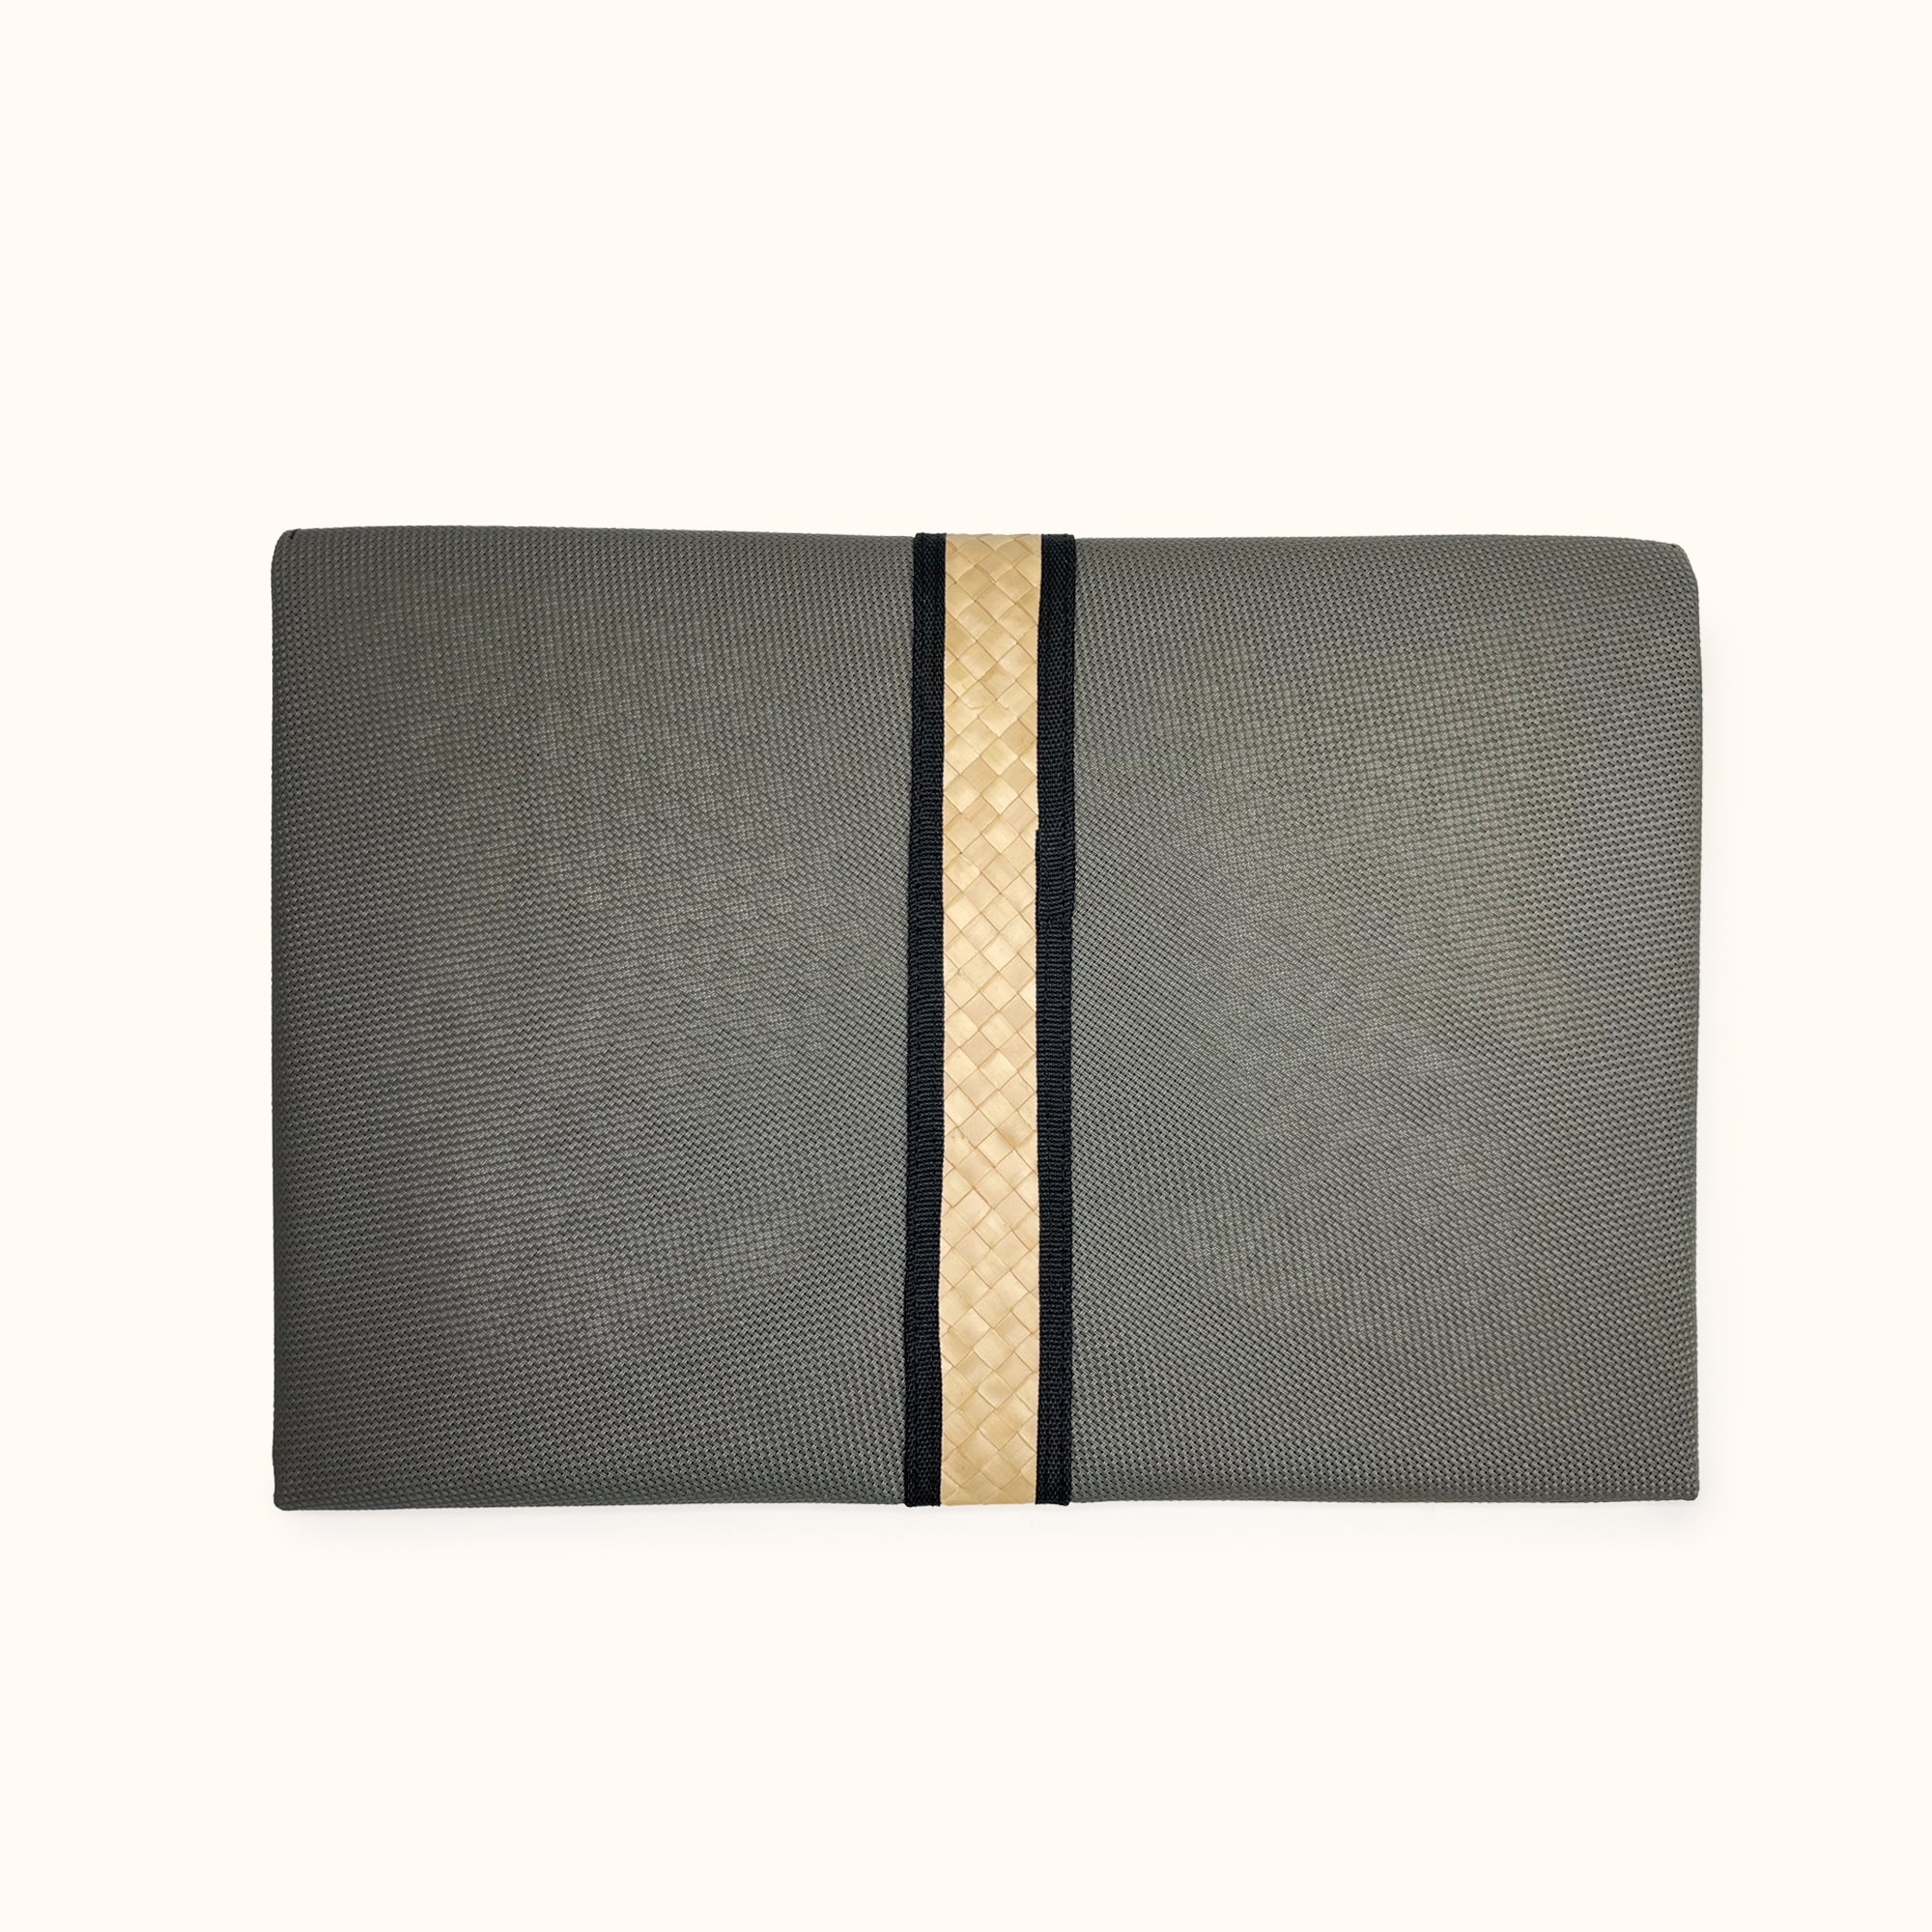 Demi Bumi Rumpun Laptop Sleeves | Other Accessories | The Green Collective SG